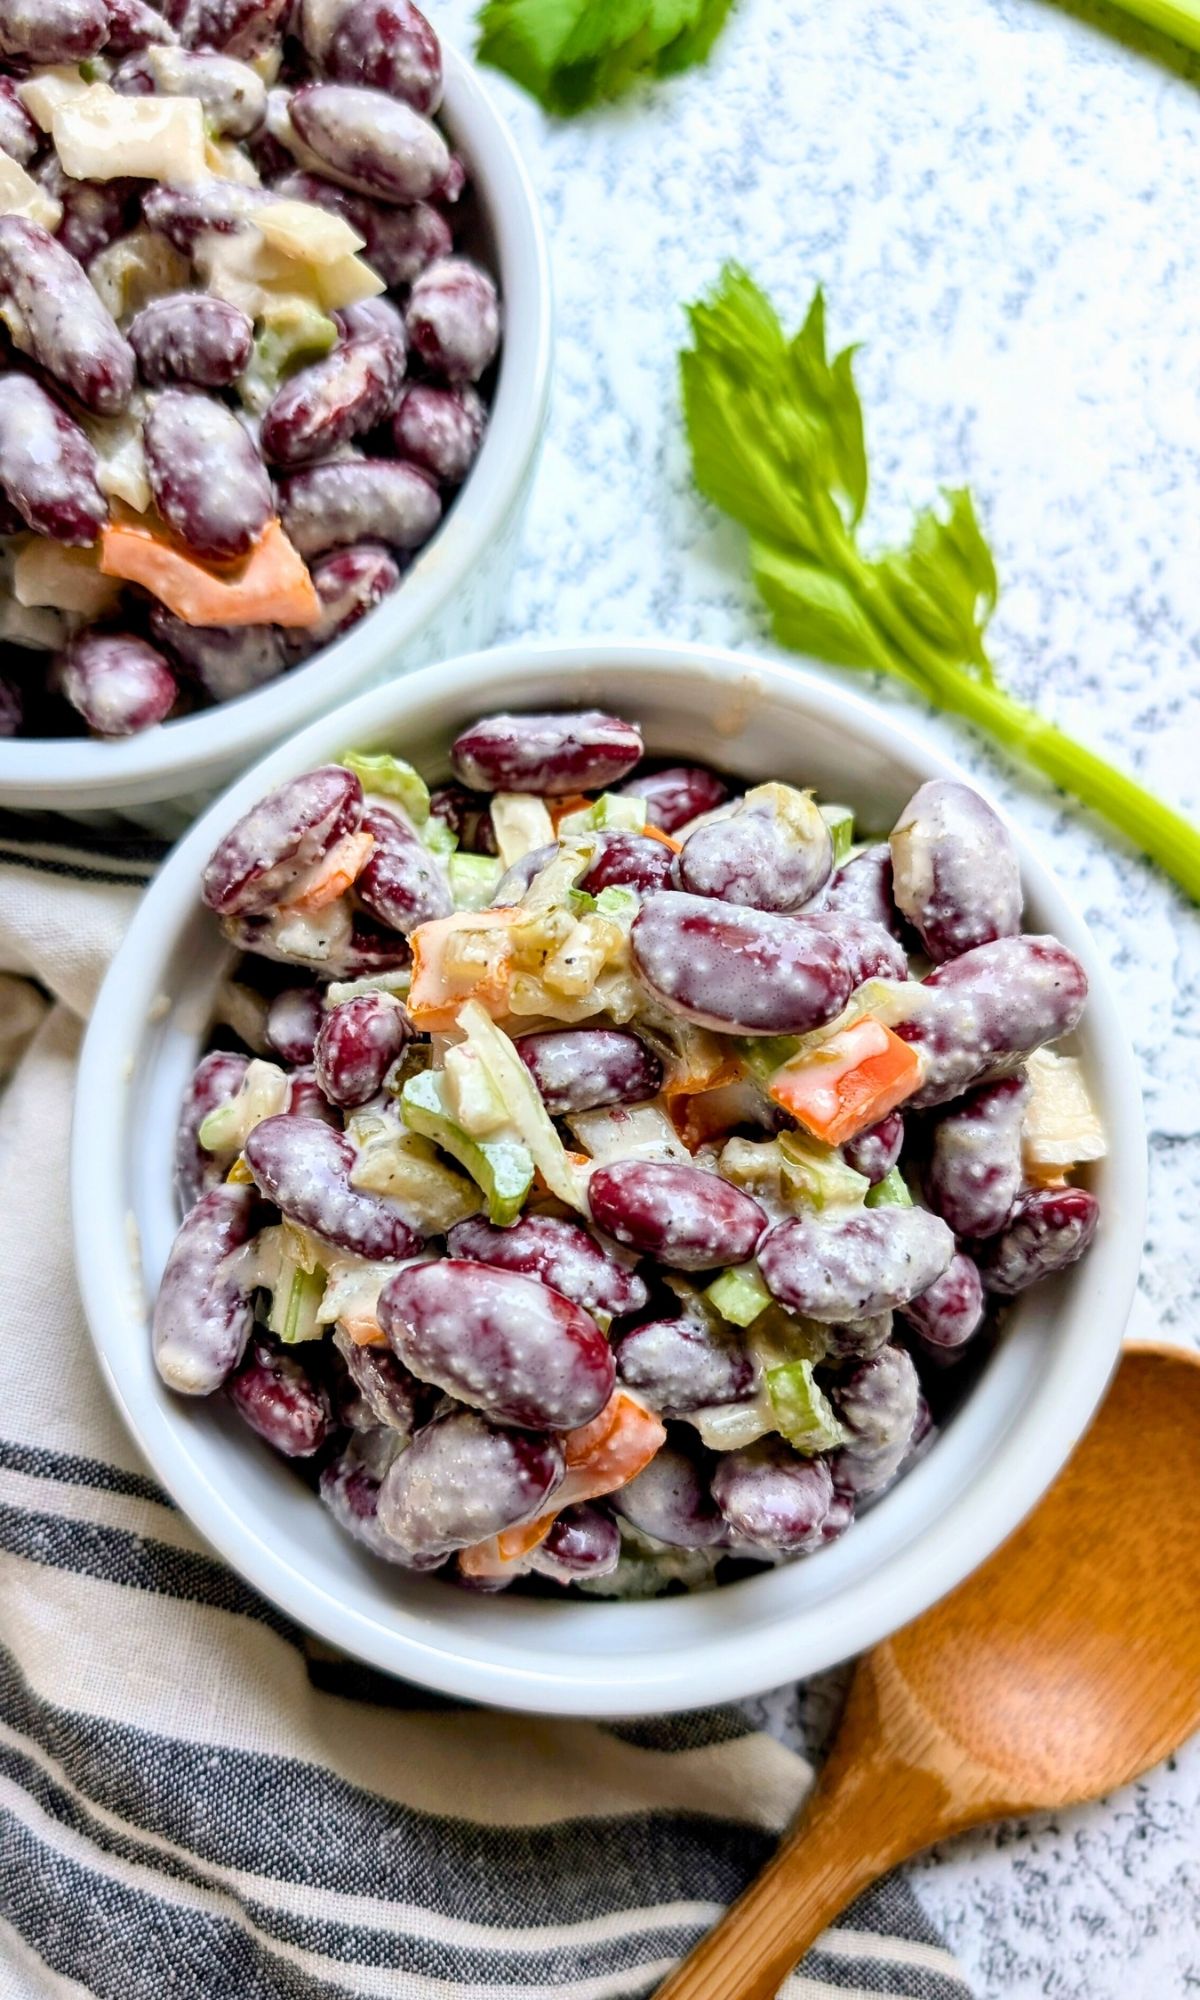 white fence farm copycat recipes like kidney bean salad you can make at home.